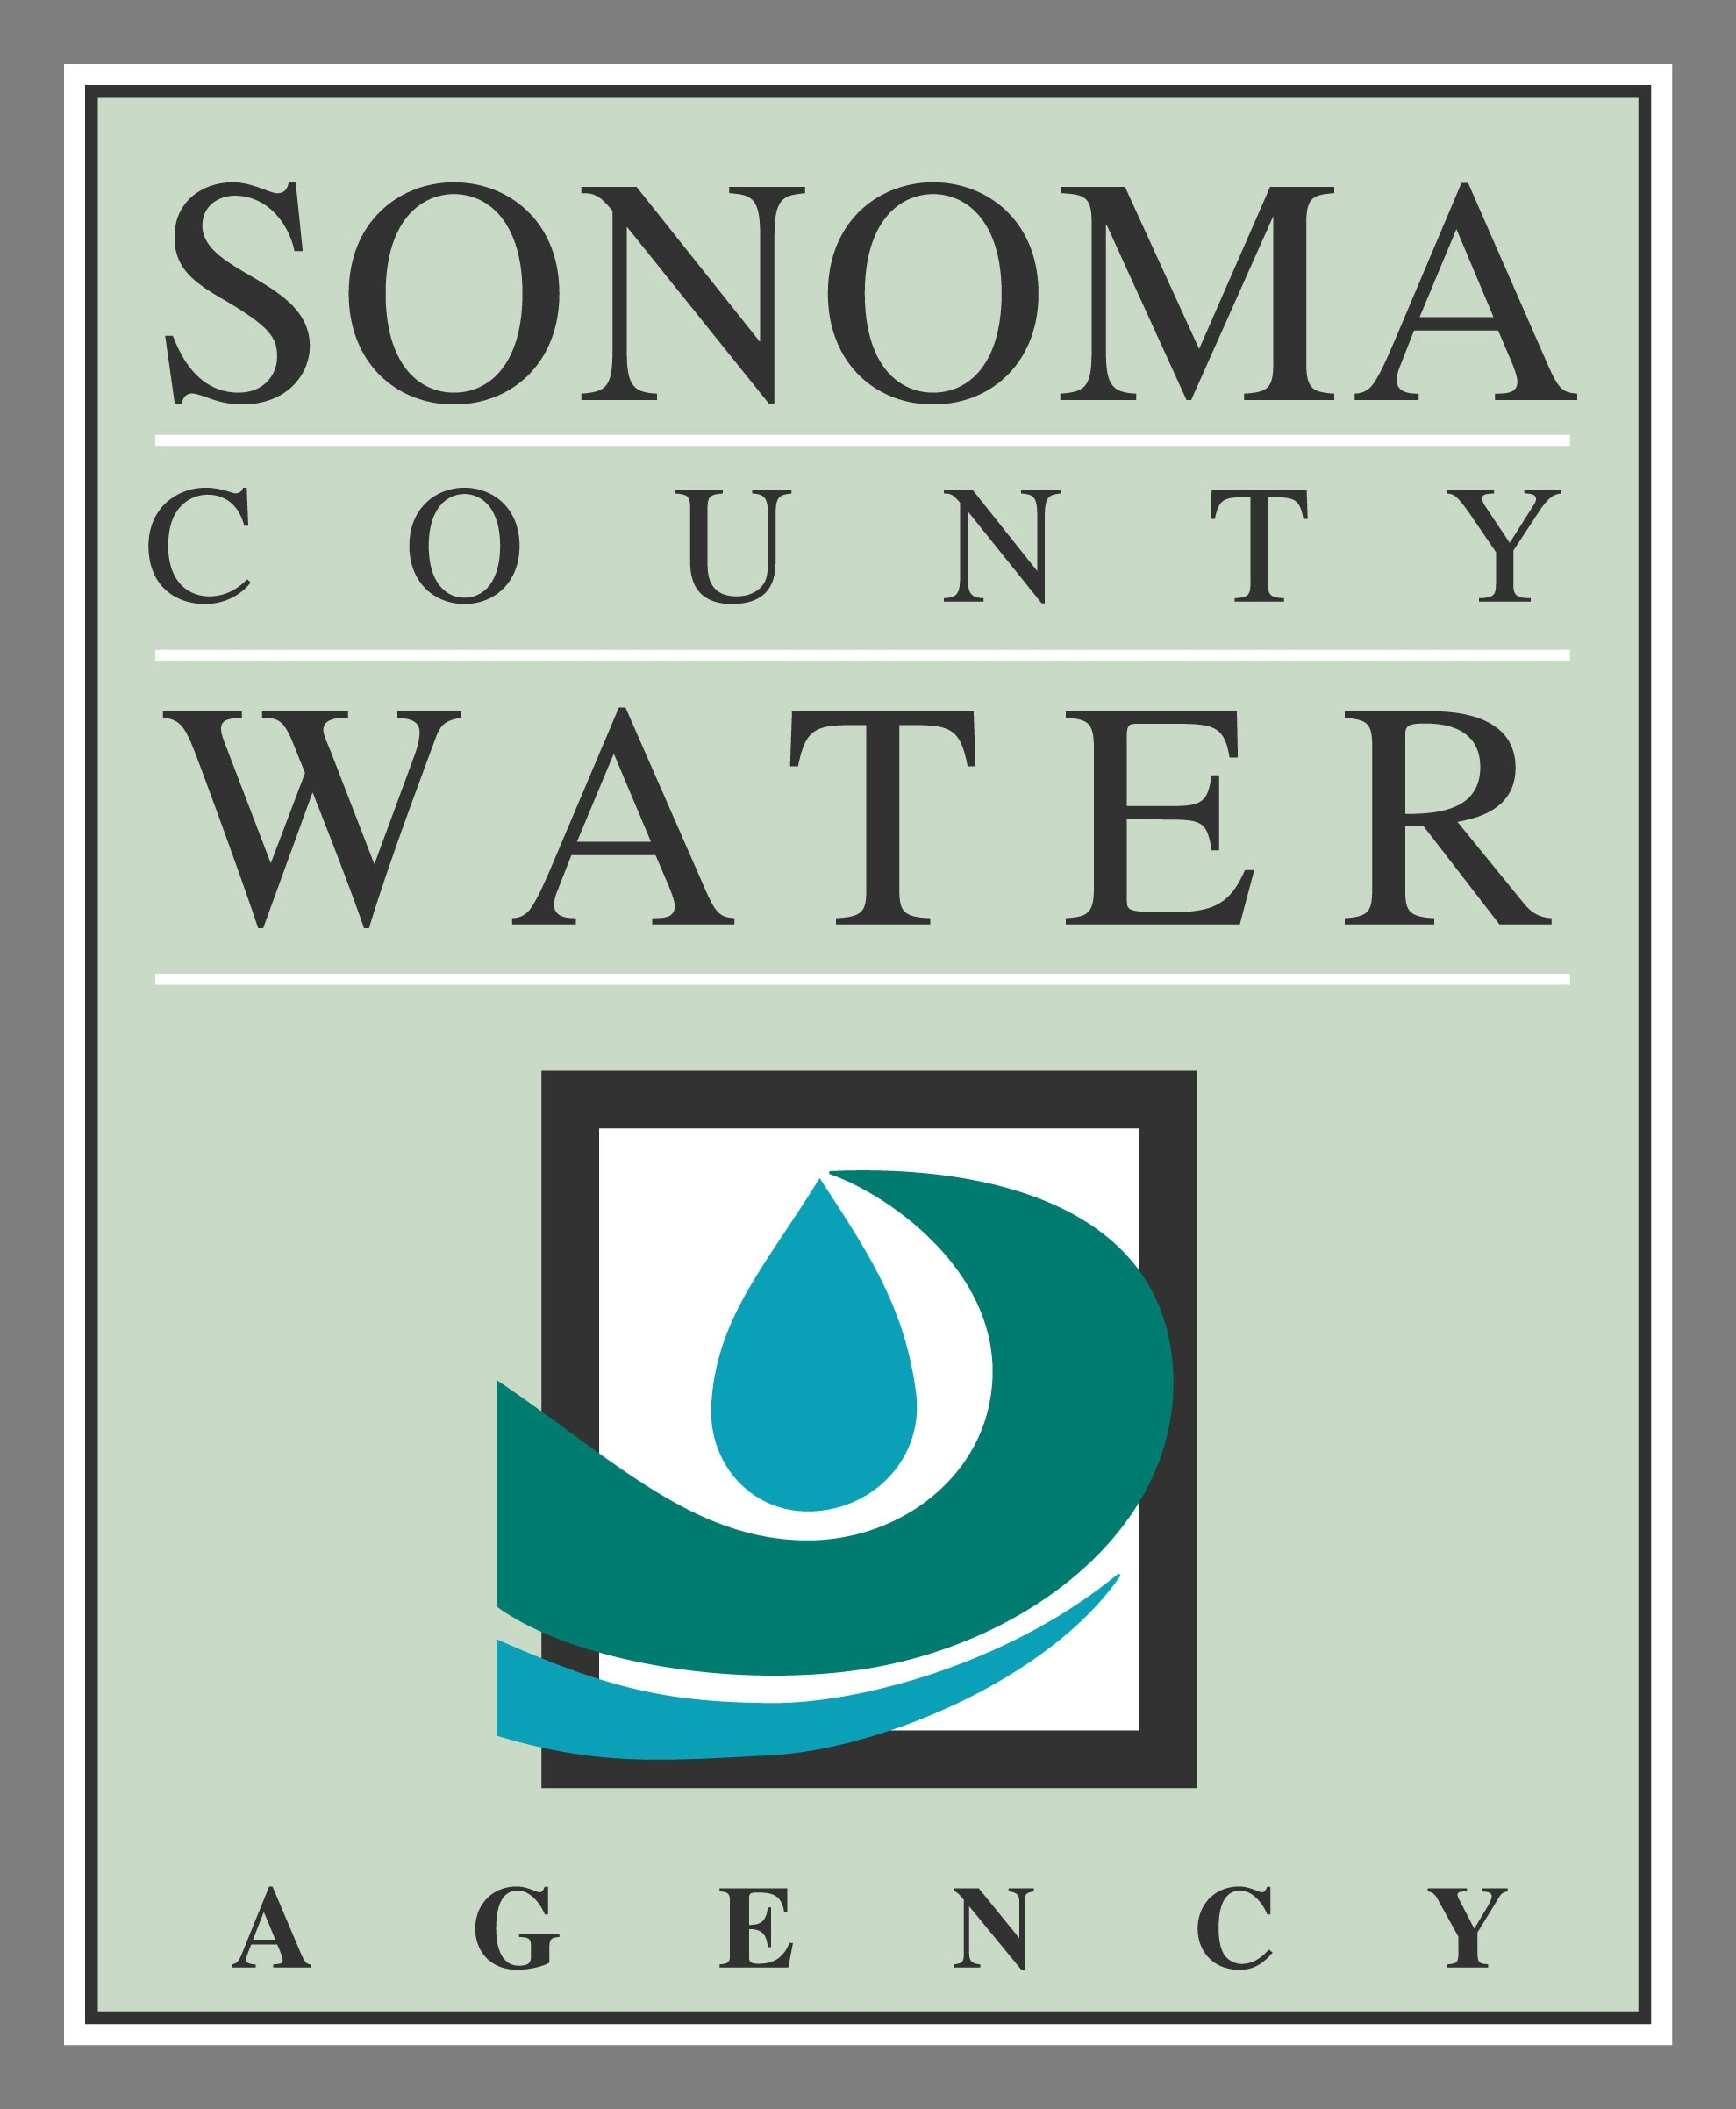 Sonoma County Water Agency